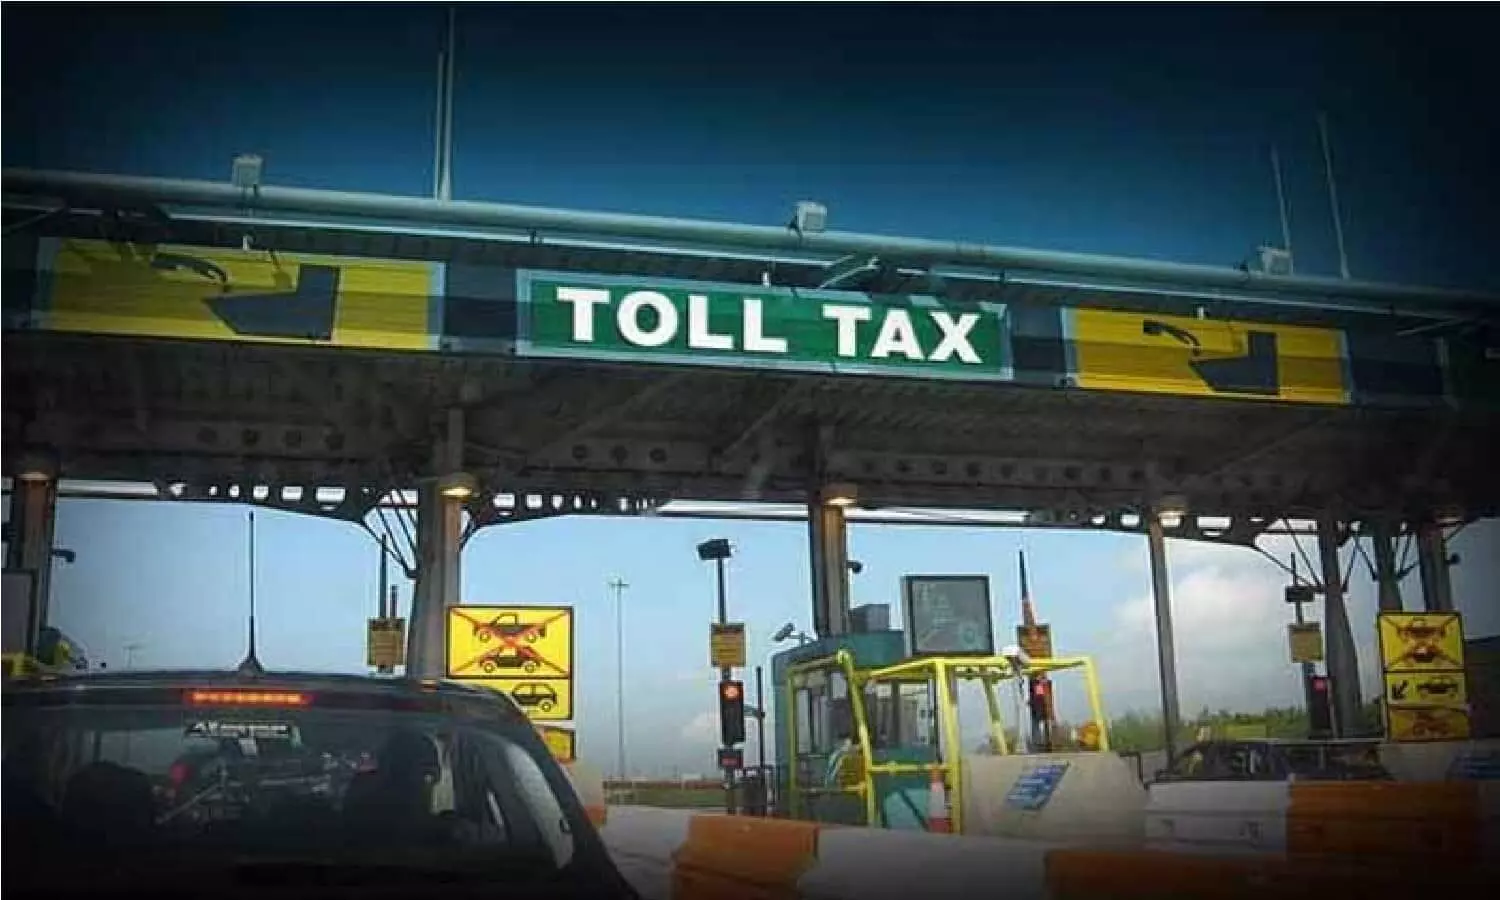 Last year also there was an increase in toll tax